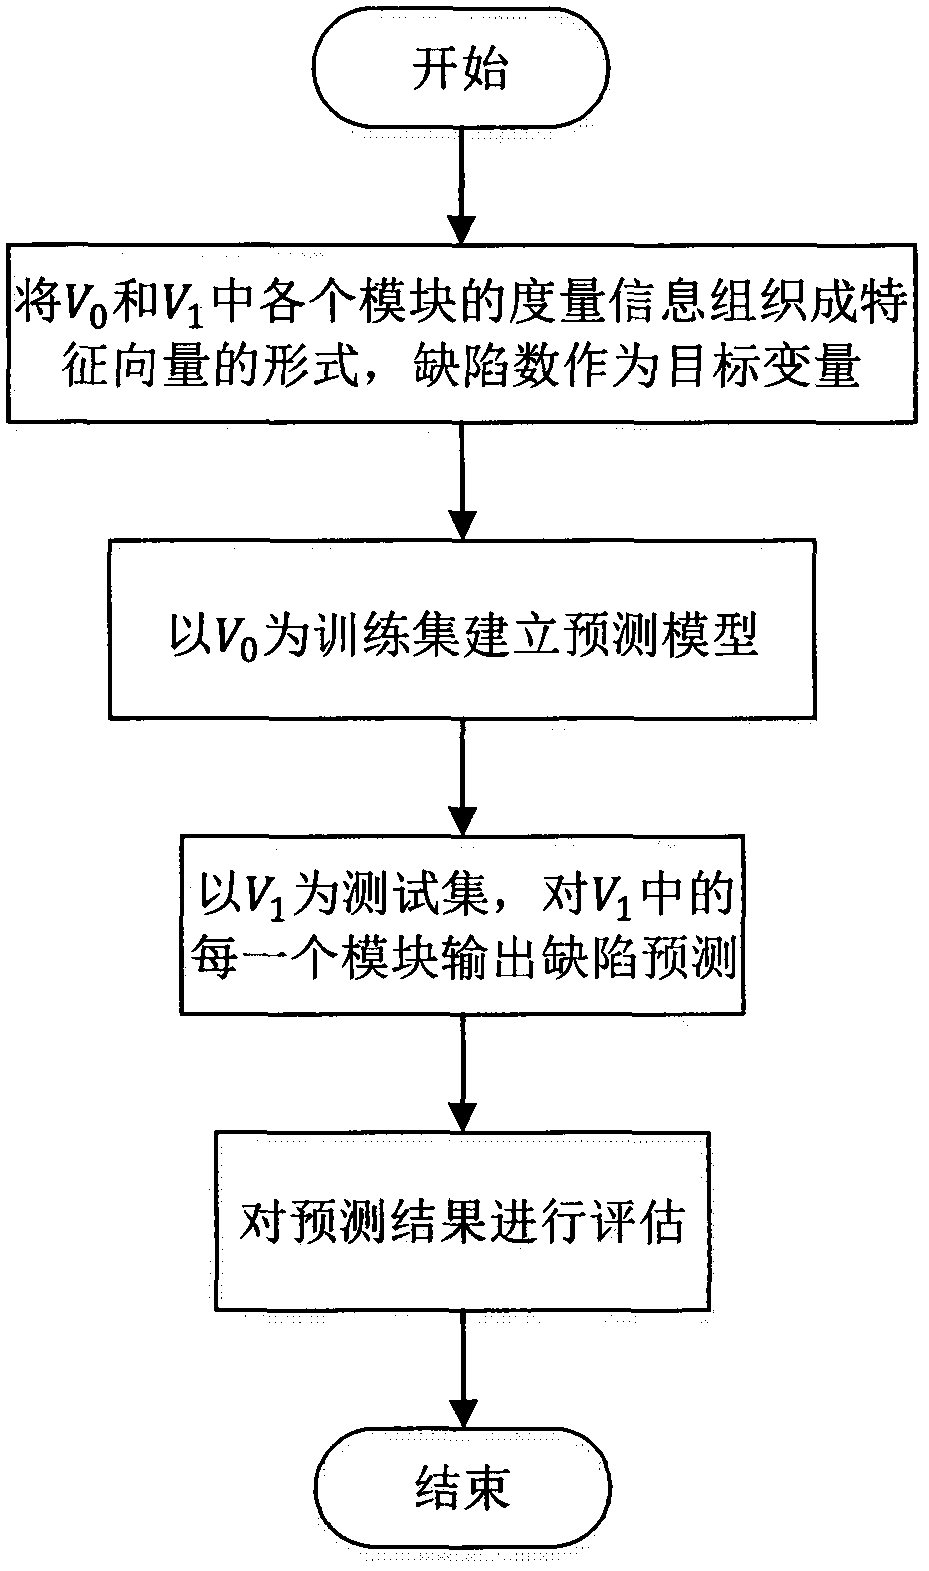 Software reliability growth model-based test workload allocation method